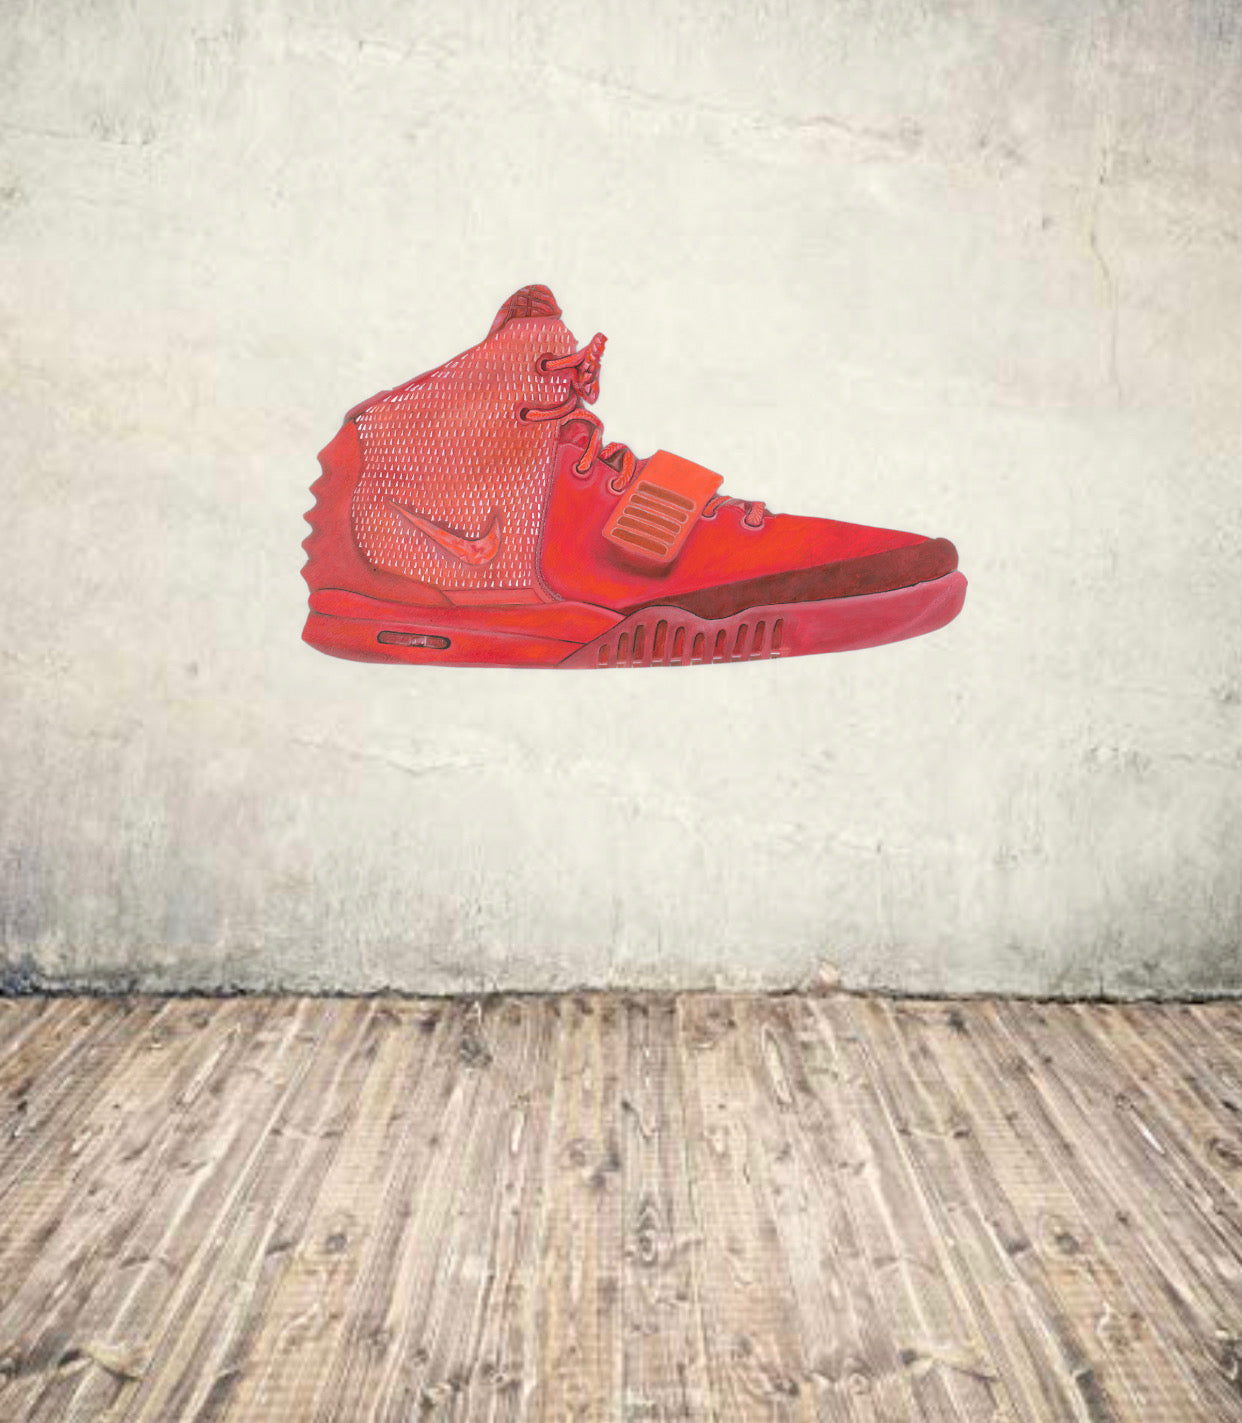 red october size 13